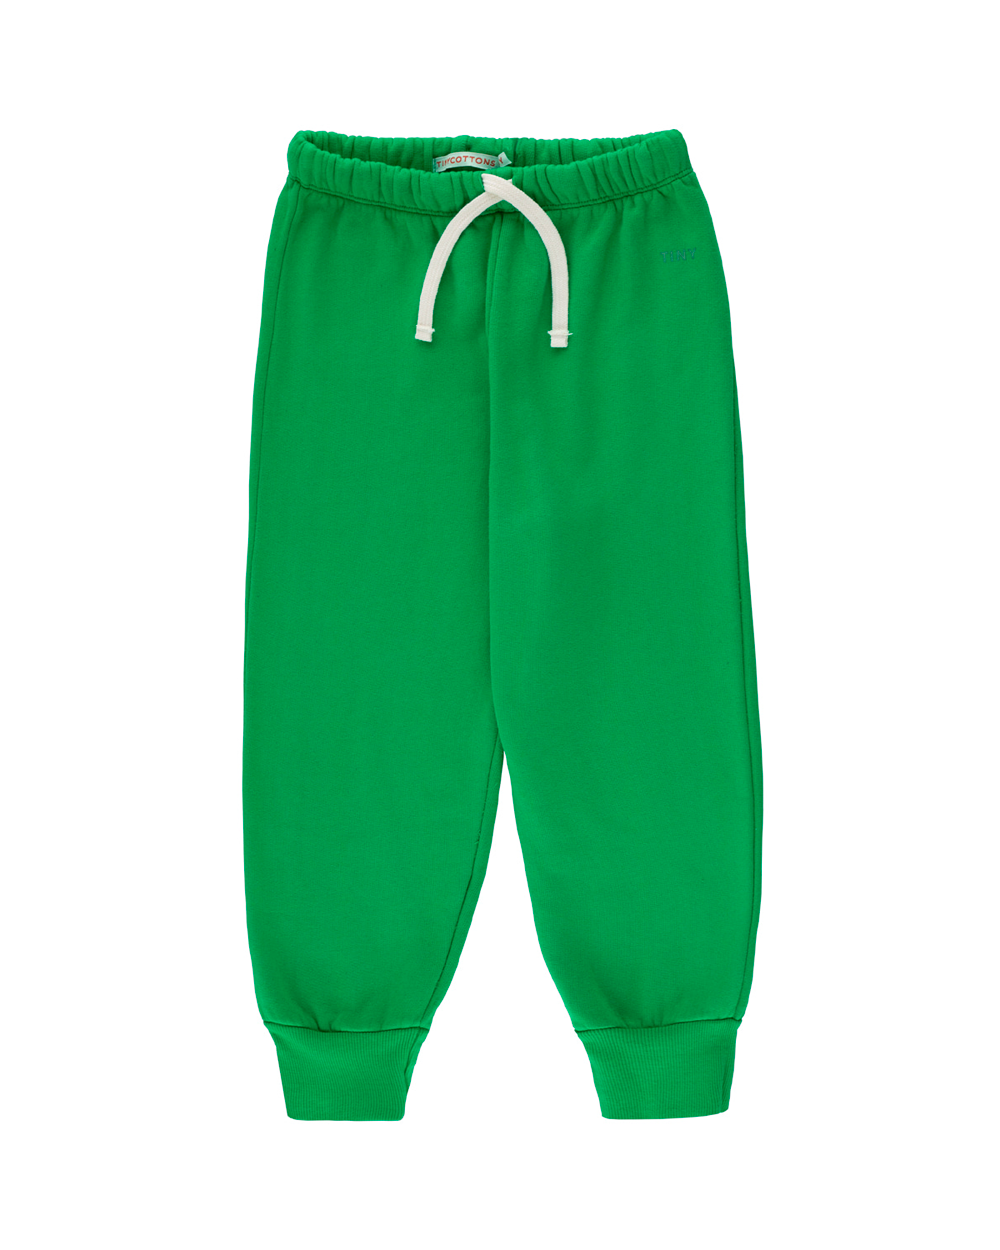 [TINY COTTONS]TINY SWEATPANT /grass green [8Y]